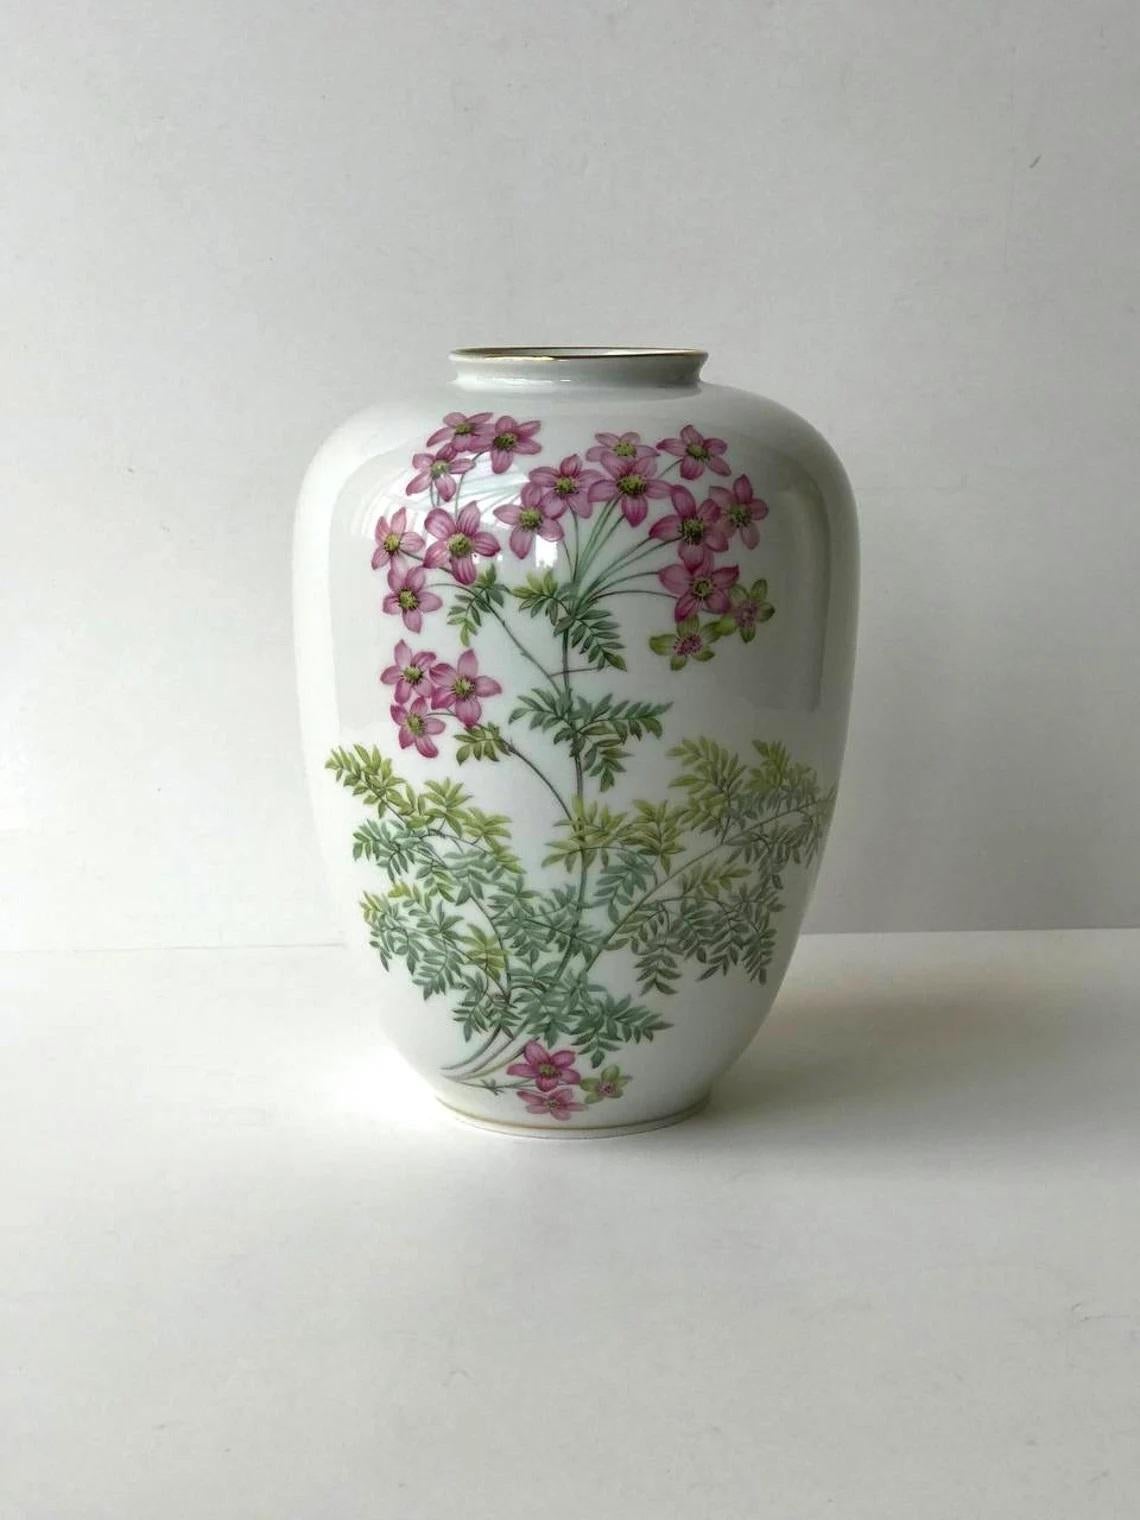 Vintage Weimar vase for flowers.

Porcelain vase with floral pattern.

1950’s.

Germany, Weimar.

In excellent condition, no chips, cracks or crazing.

Size:

Height - 8.7 inc 22 cm
Diameter - 6.3 inc 16 cm.